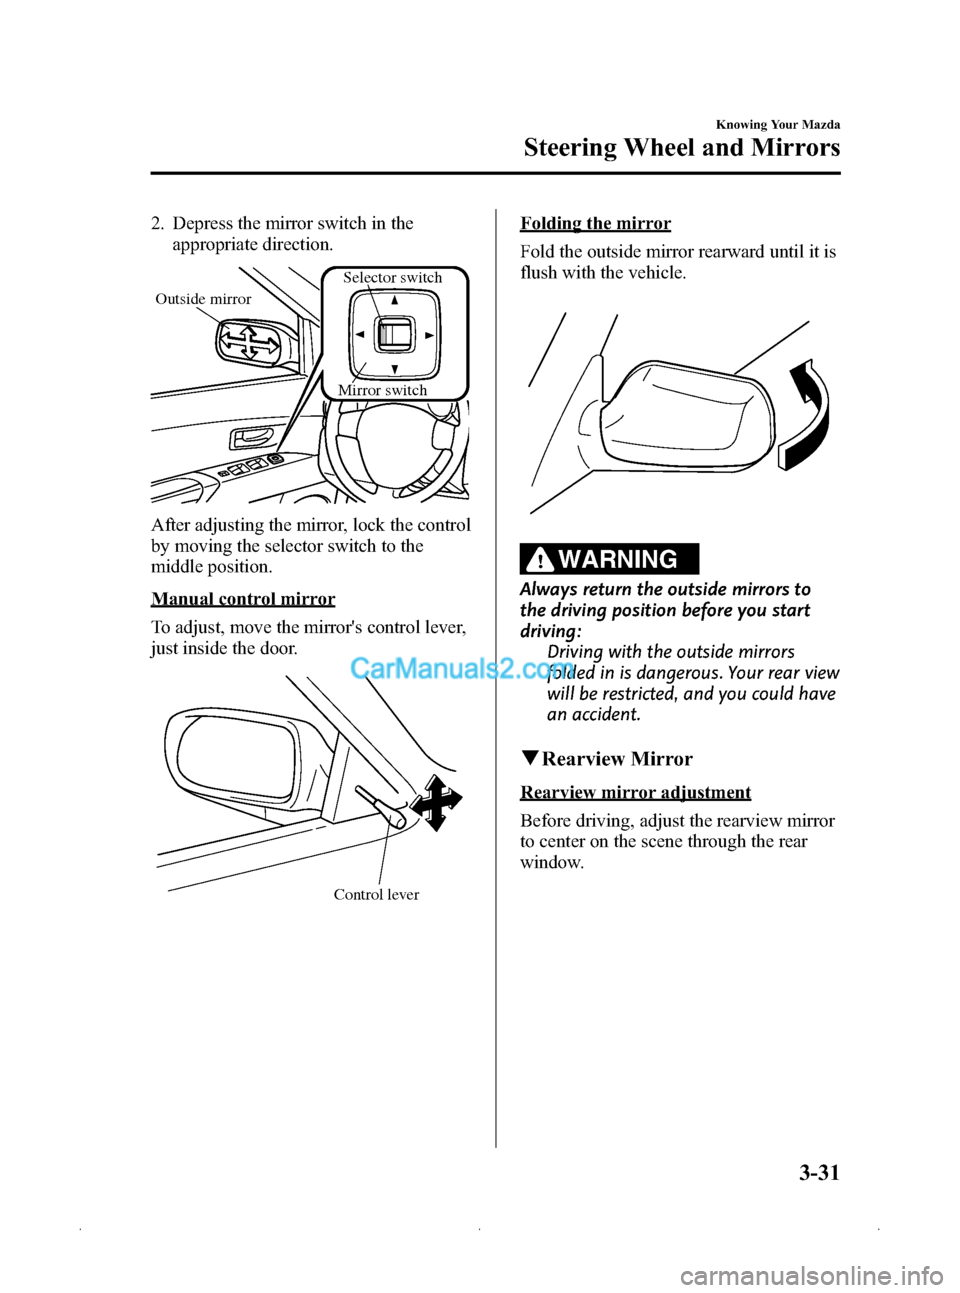 MAZDA MODEL MAZDASPEED 3 2009  Owners Manual (in English) Black plate (105,1)
2. Depress the mirror switch in theappropriate direction.
Mirror switch
Outside mirror
Selector switch
After adjusting the mirror, lock the control
by moving the selector switch to